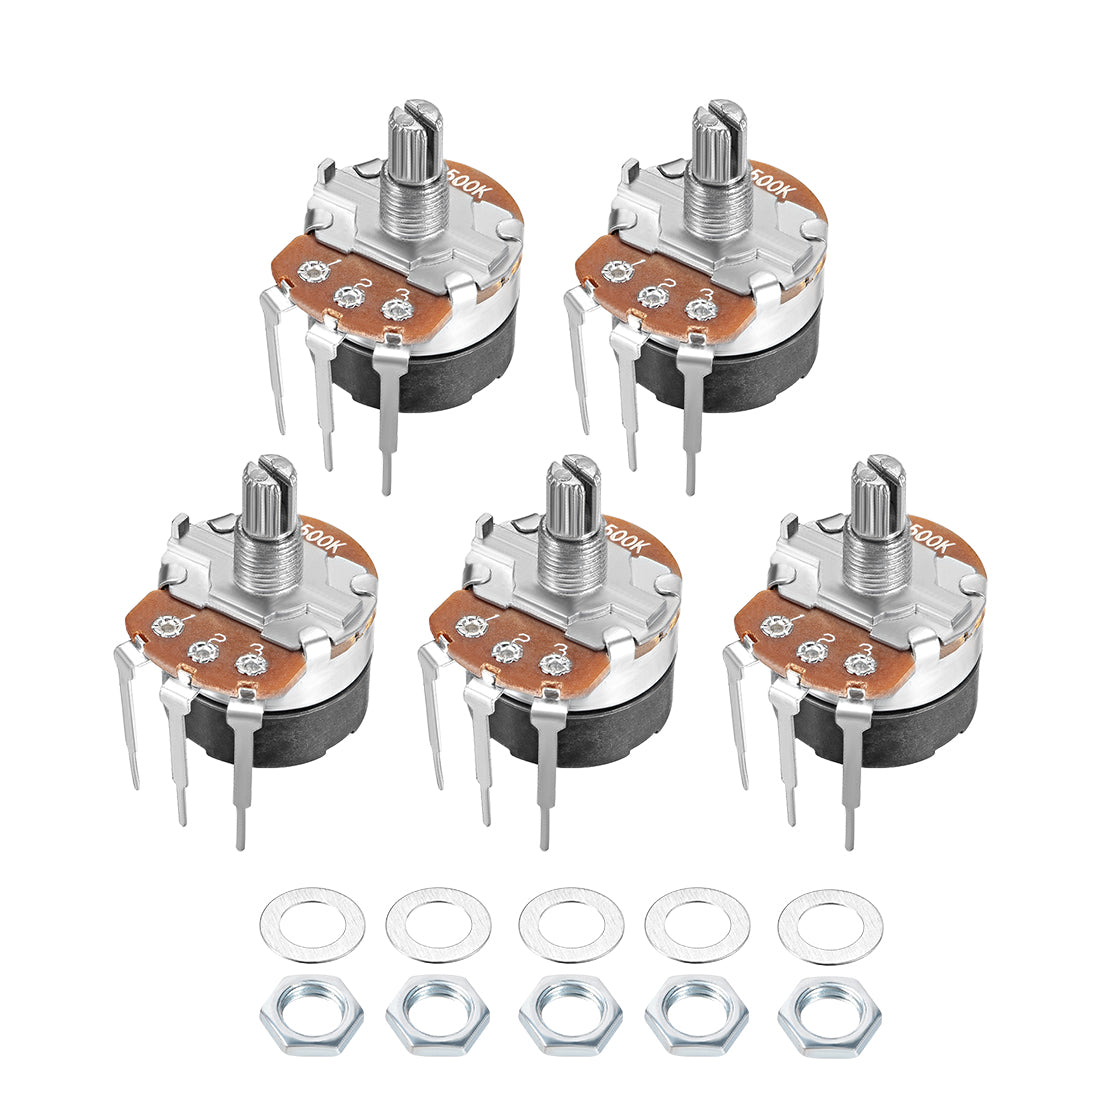 uxcell Uxcell WH138 Potentiometer with Switch 500K Ohm Variable Resistors Single Turn Rotary Carbon Film Taper 5pcs